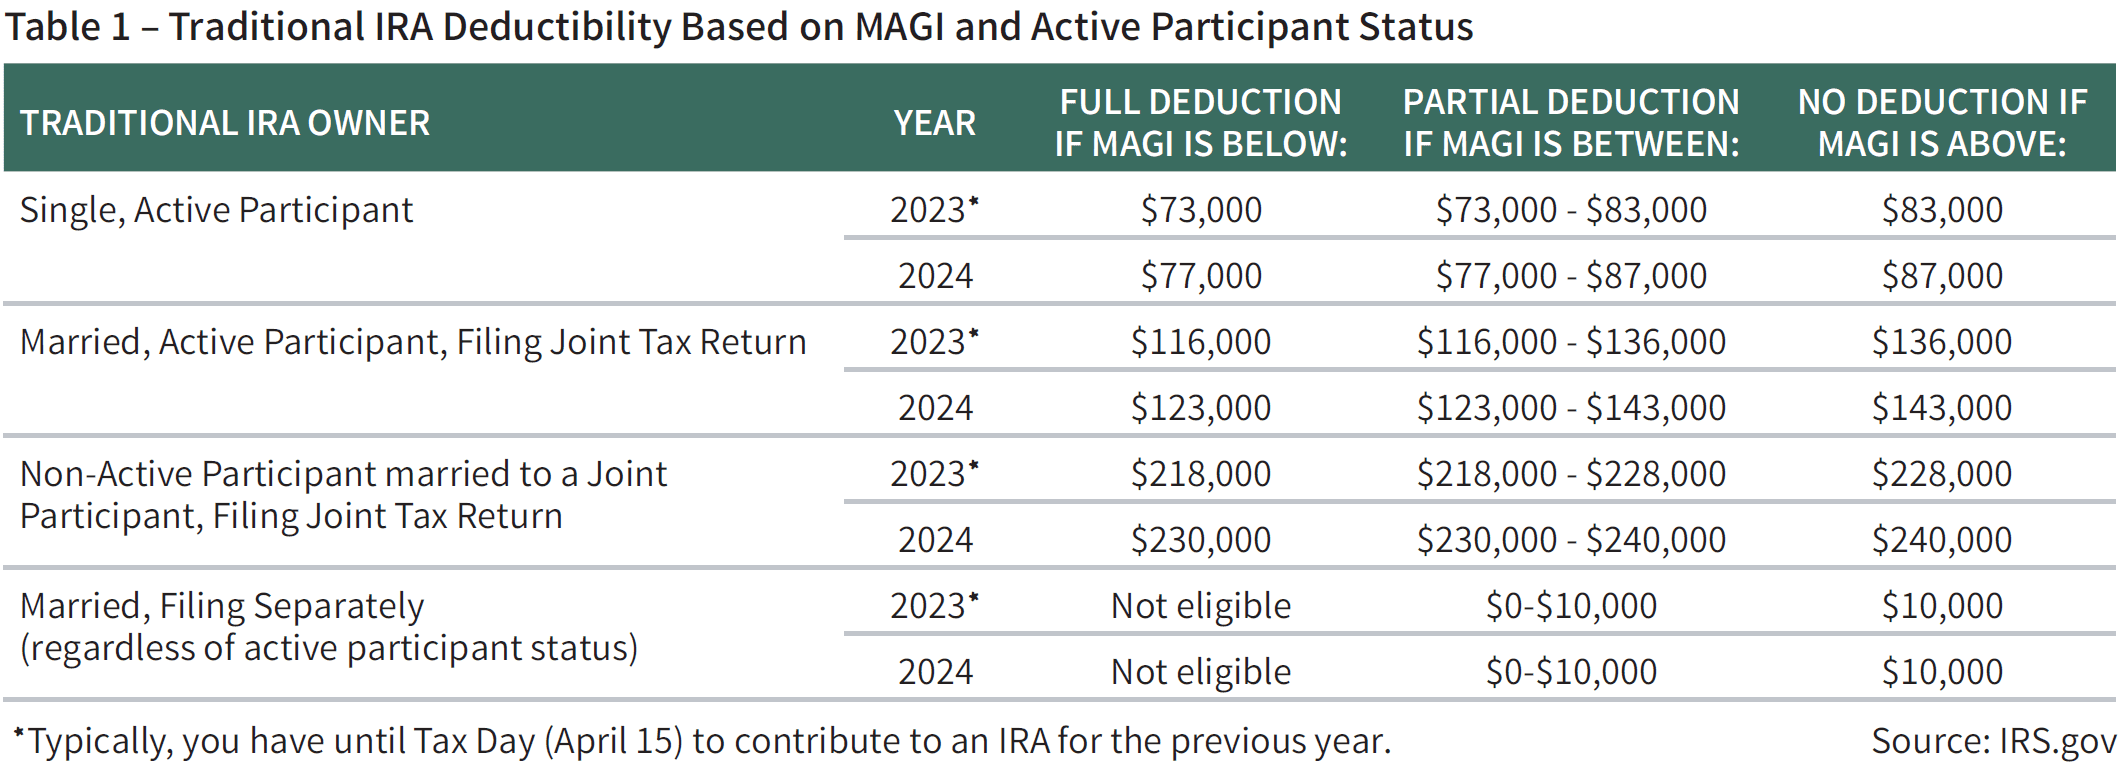 Table With Deduction Limits for Traditional IRA Deductibility Based on MAGI and Active Participant Status